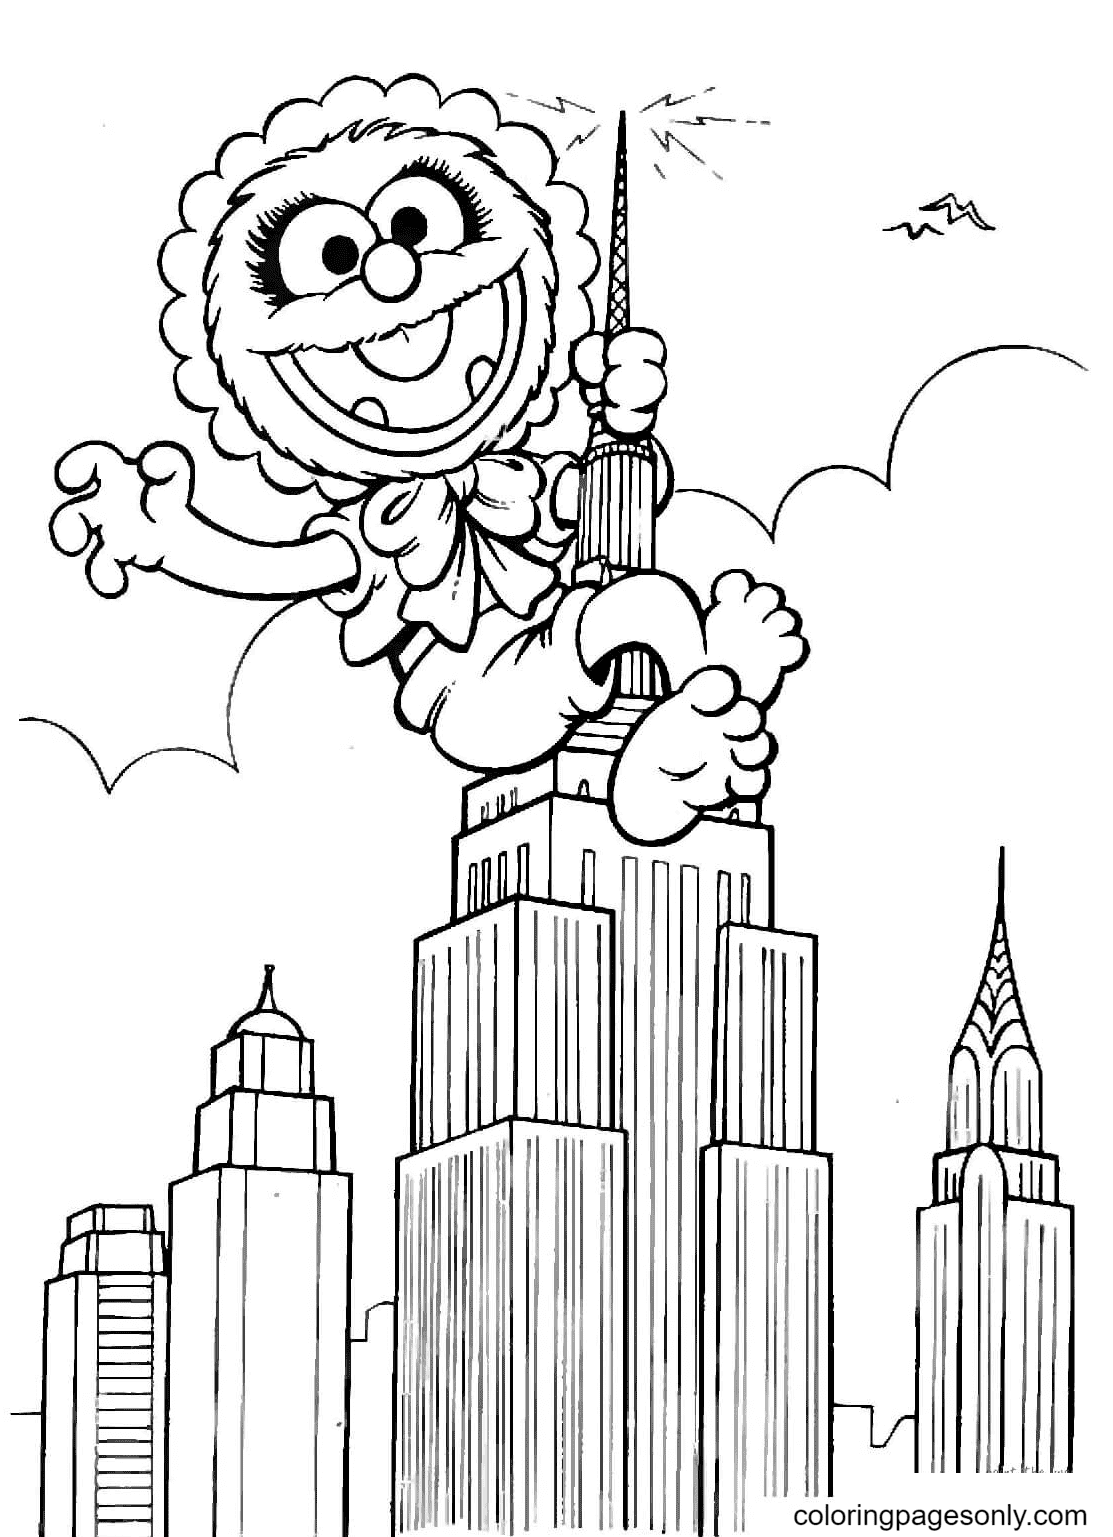 Animal Climbs The Skyscraper Coloring Page